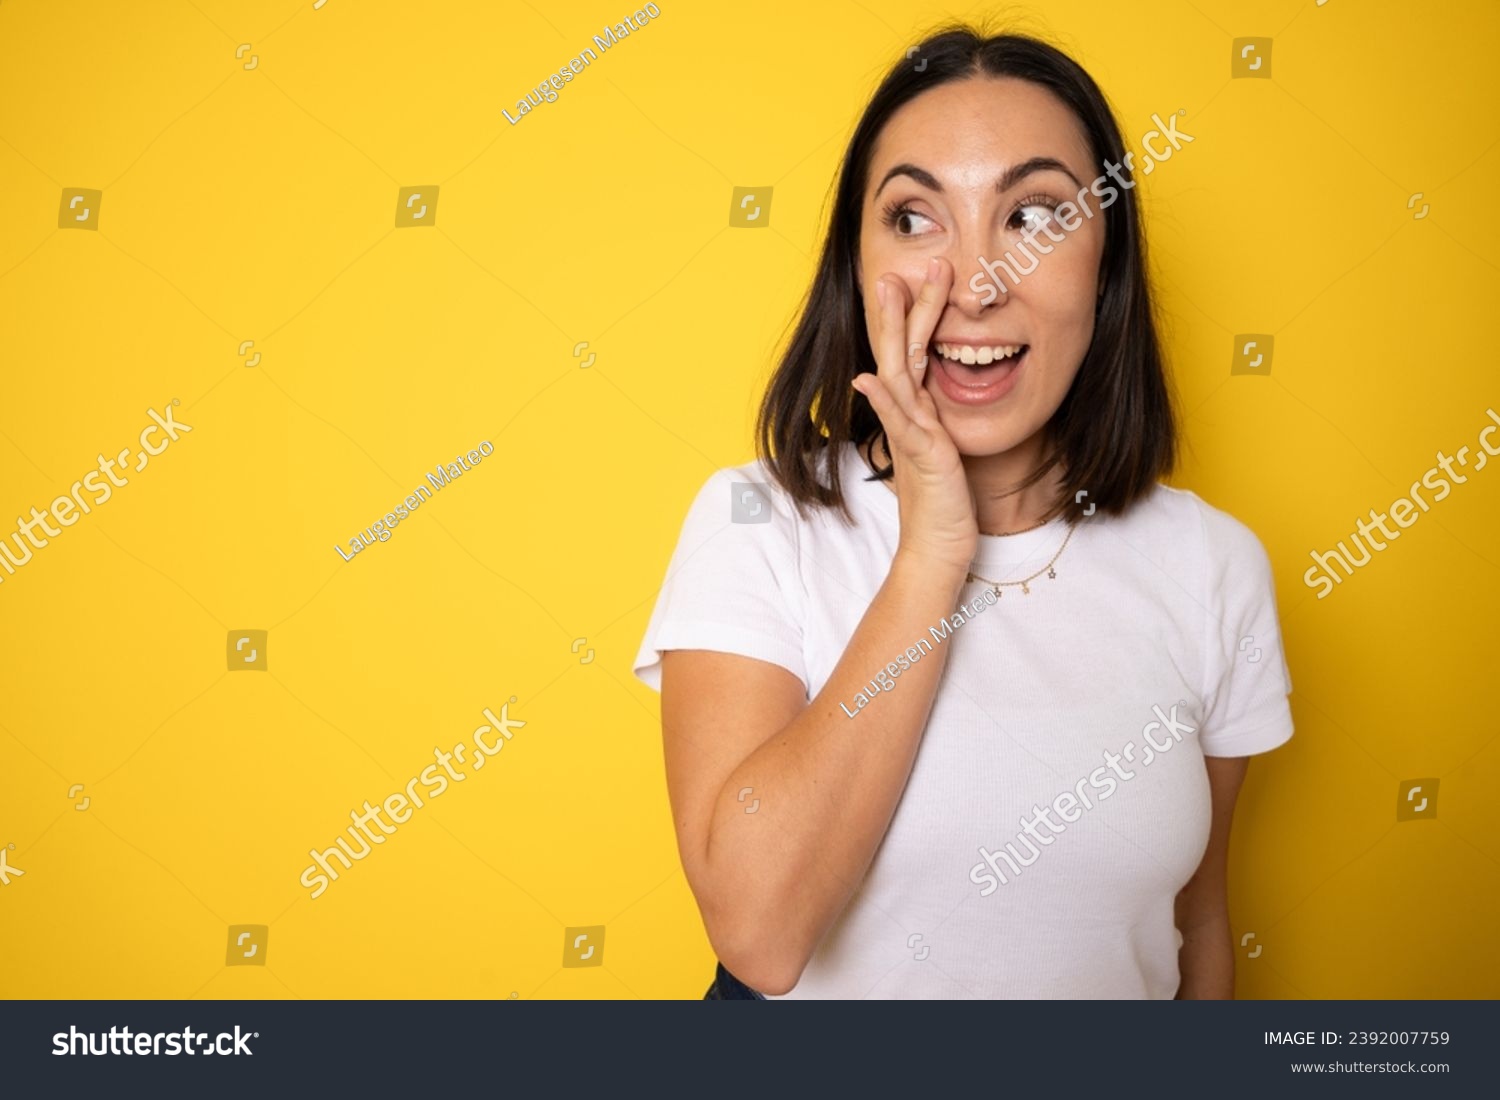 A close up portrait of a young pretty woman telling secret information, holding her hand near mouth and standing against yellow background #2392007759